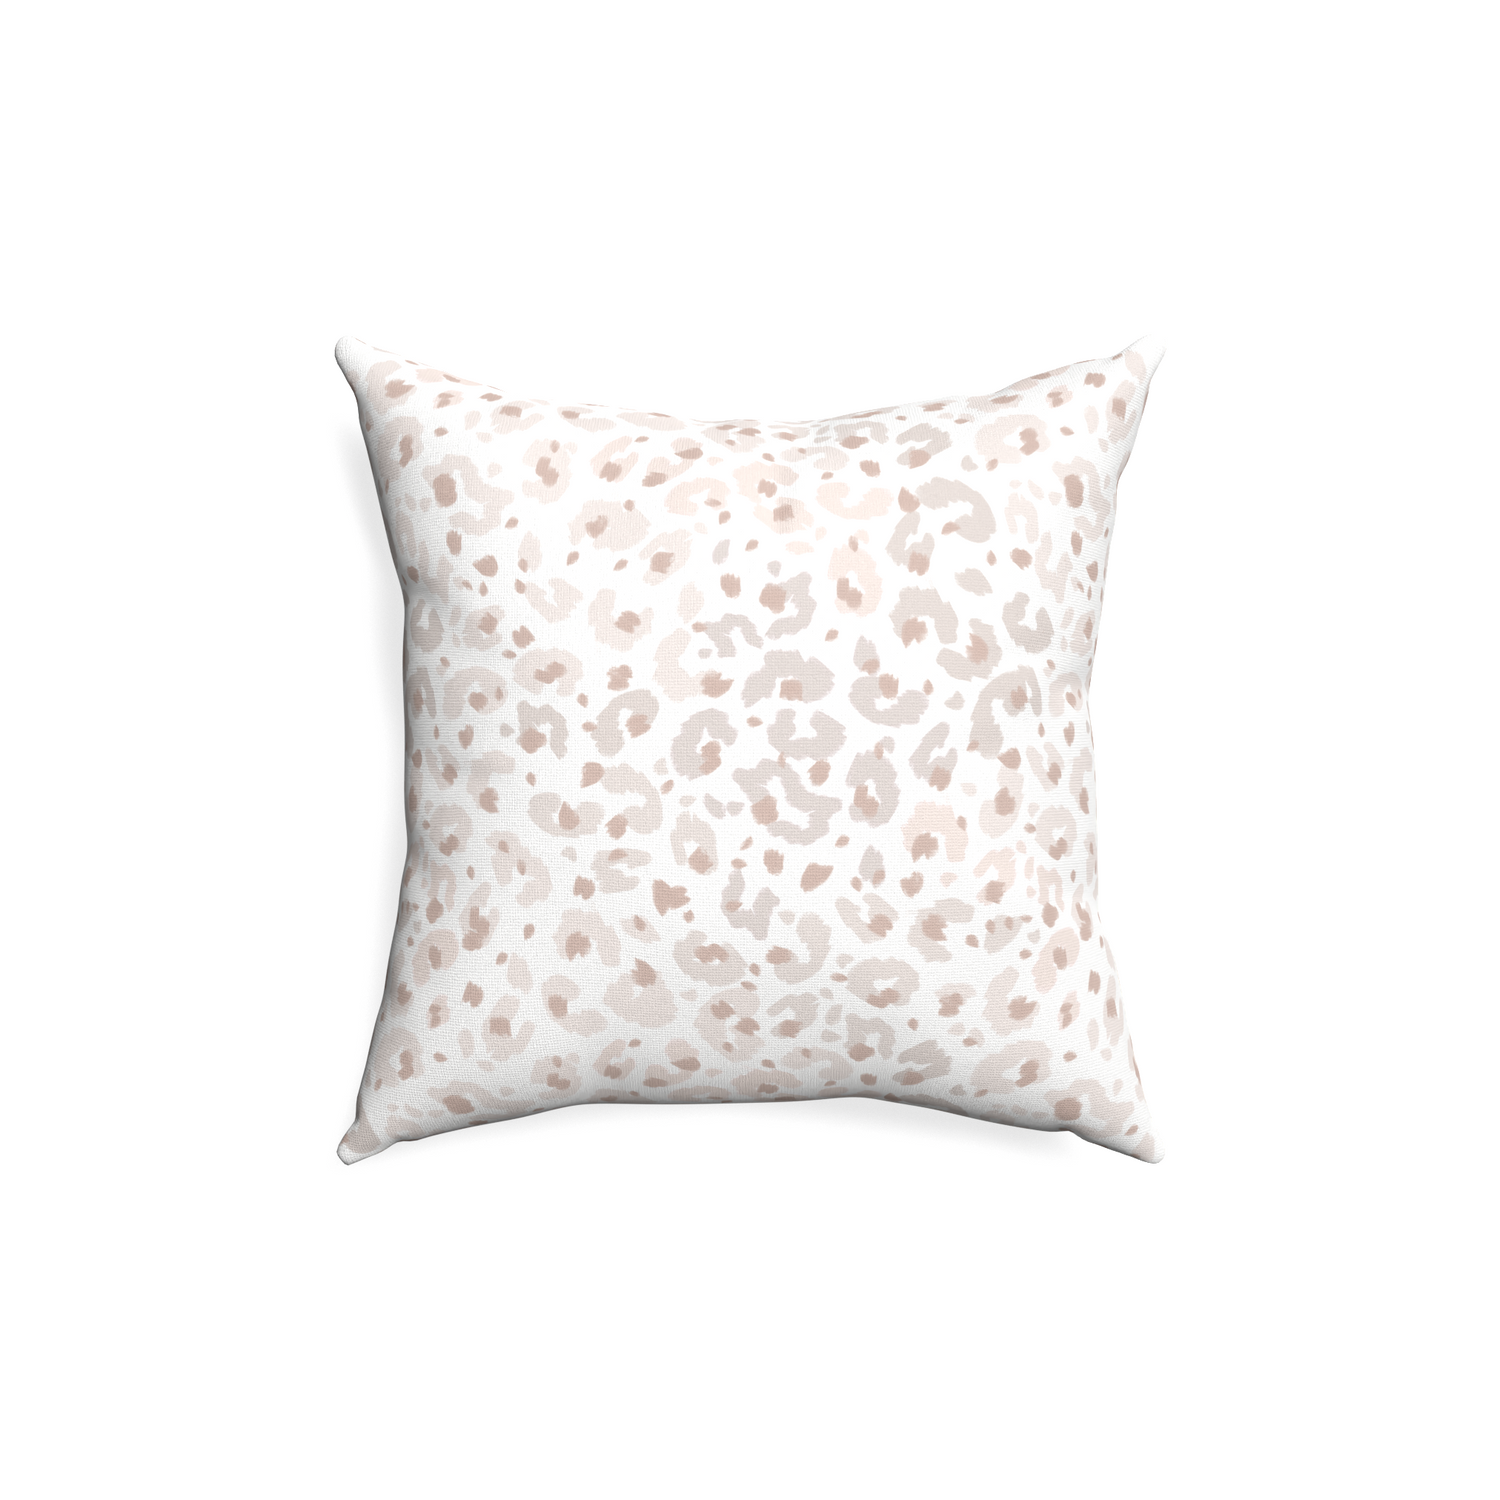 18-square rosie custom pillow with none on white background